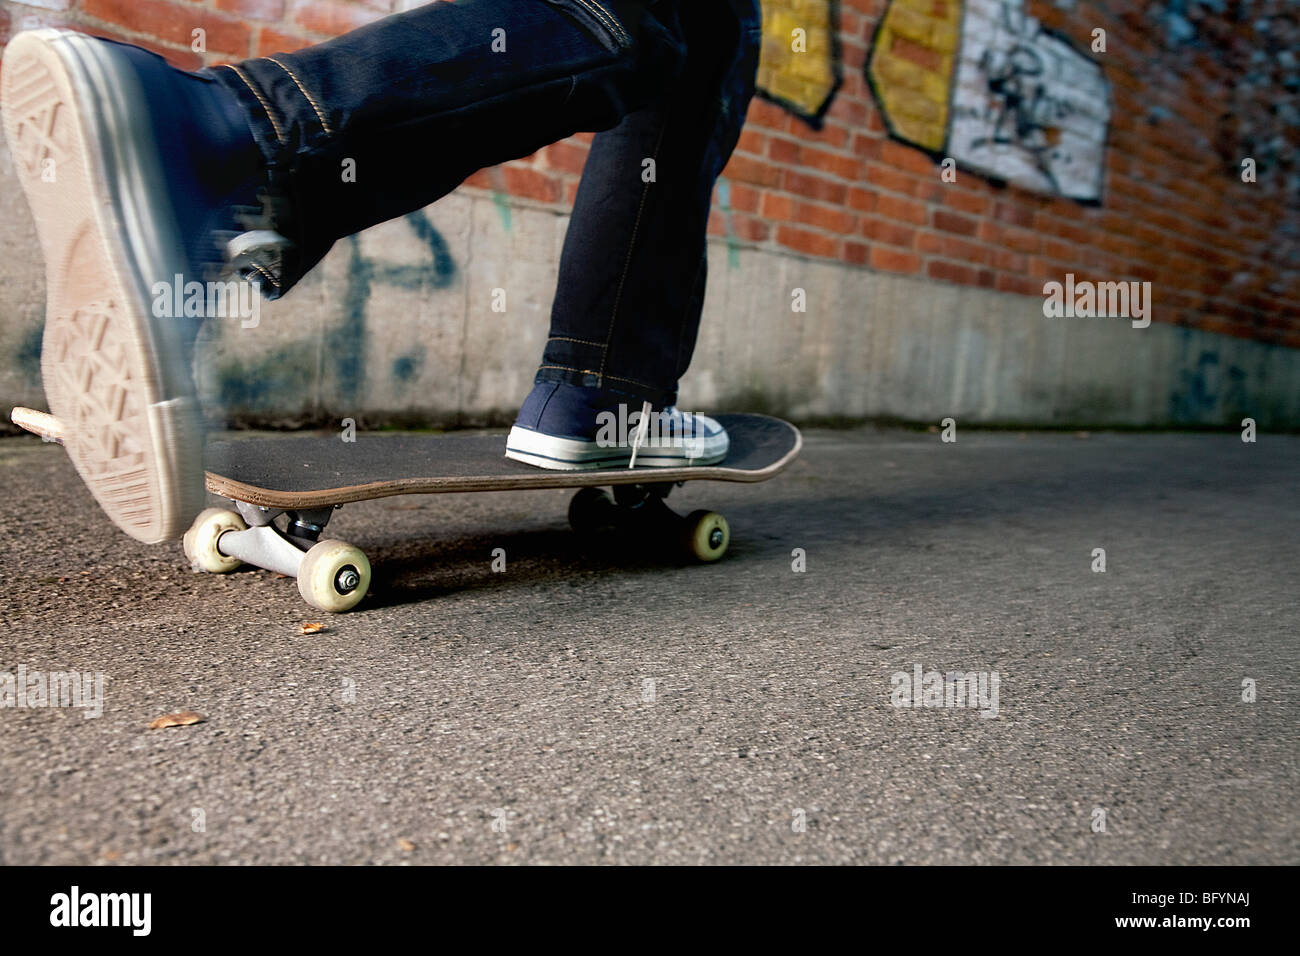 detail of young boy skateboarding Stock Photo